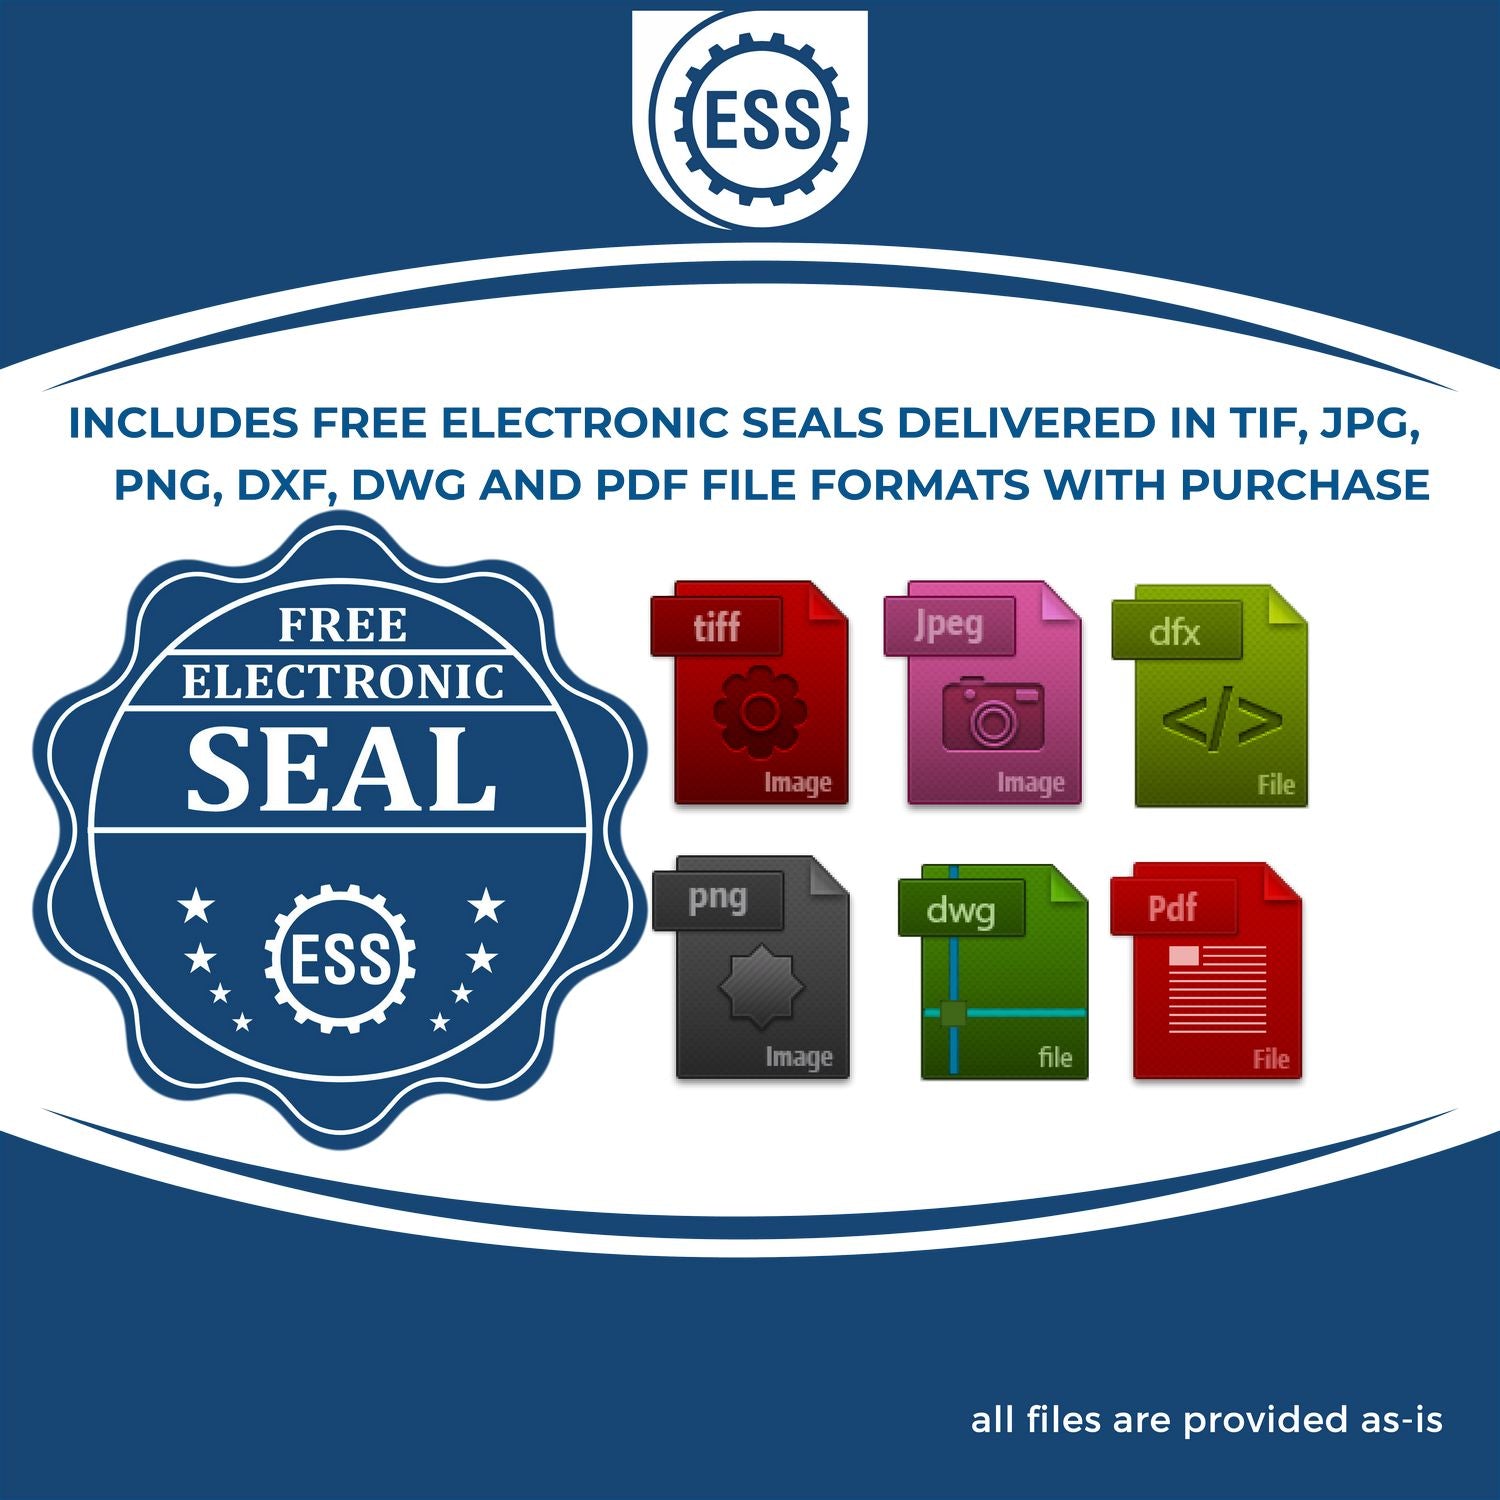 An infographic for the free electronic seal for the Wisconsin Engineer Desk Seal illustrating the different file type icons such as DXF, DWG, TIF, JPG and PNG.